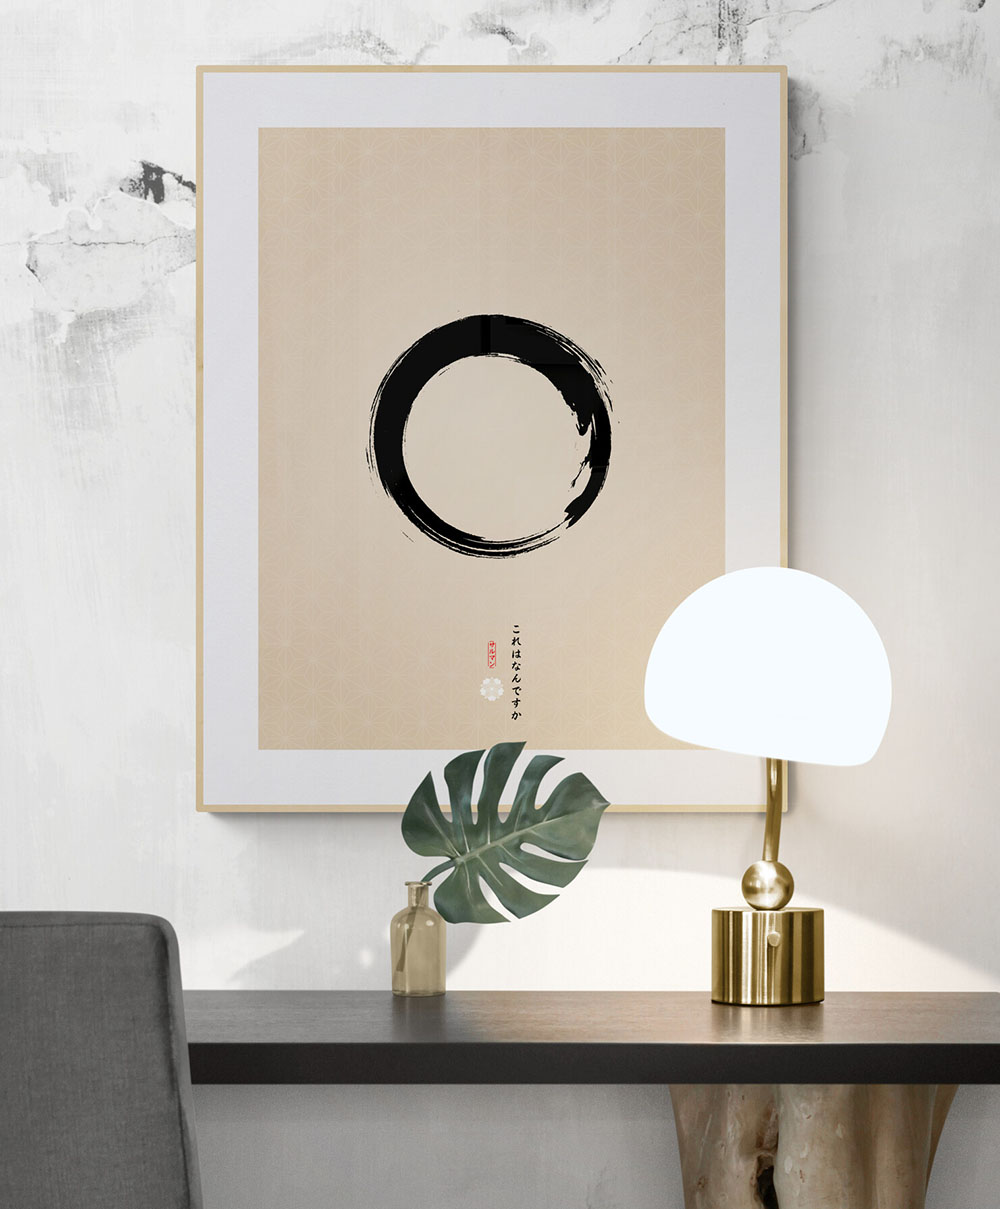 The Enso Circle in Modern Design: Influences and Inspirations - The Art ...